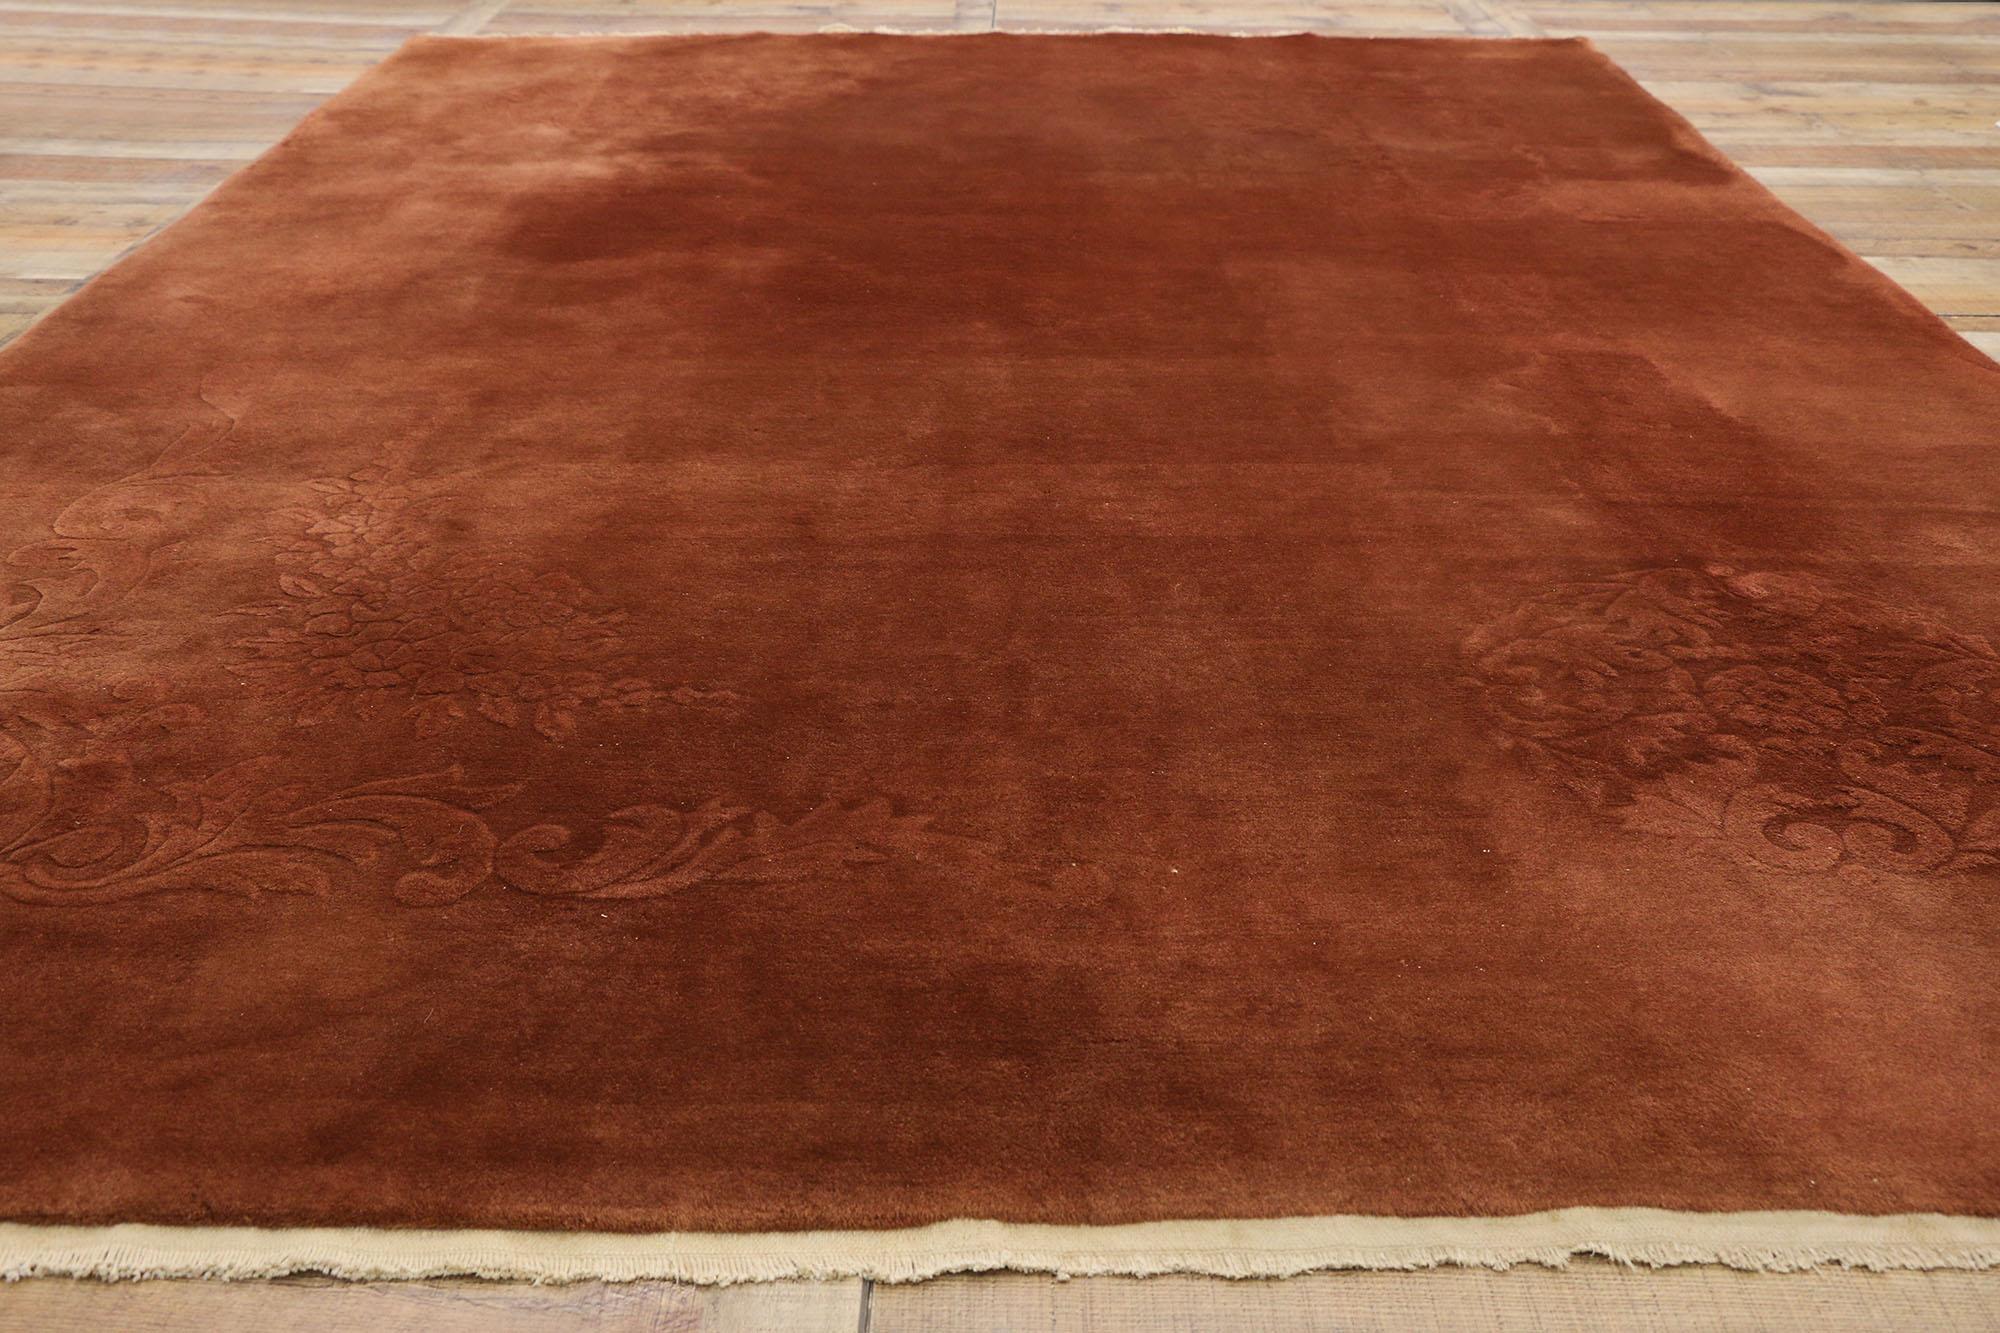 Vintage Chinese Art Deco Rug with Rustic Style and Warm, Neutral Colors 1